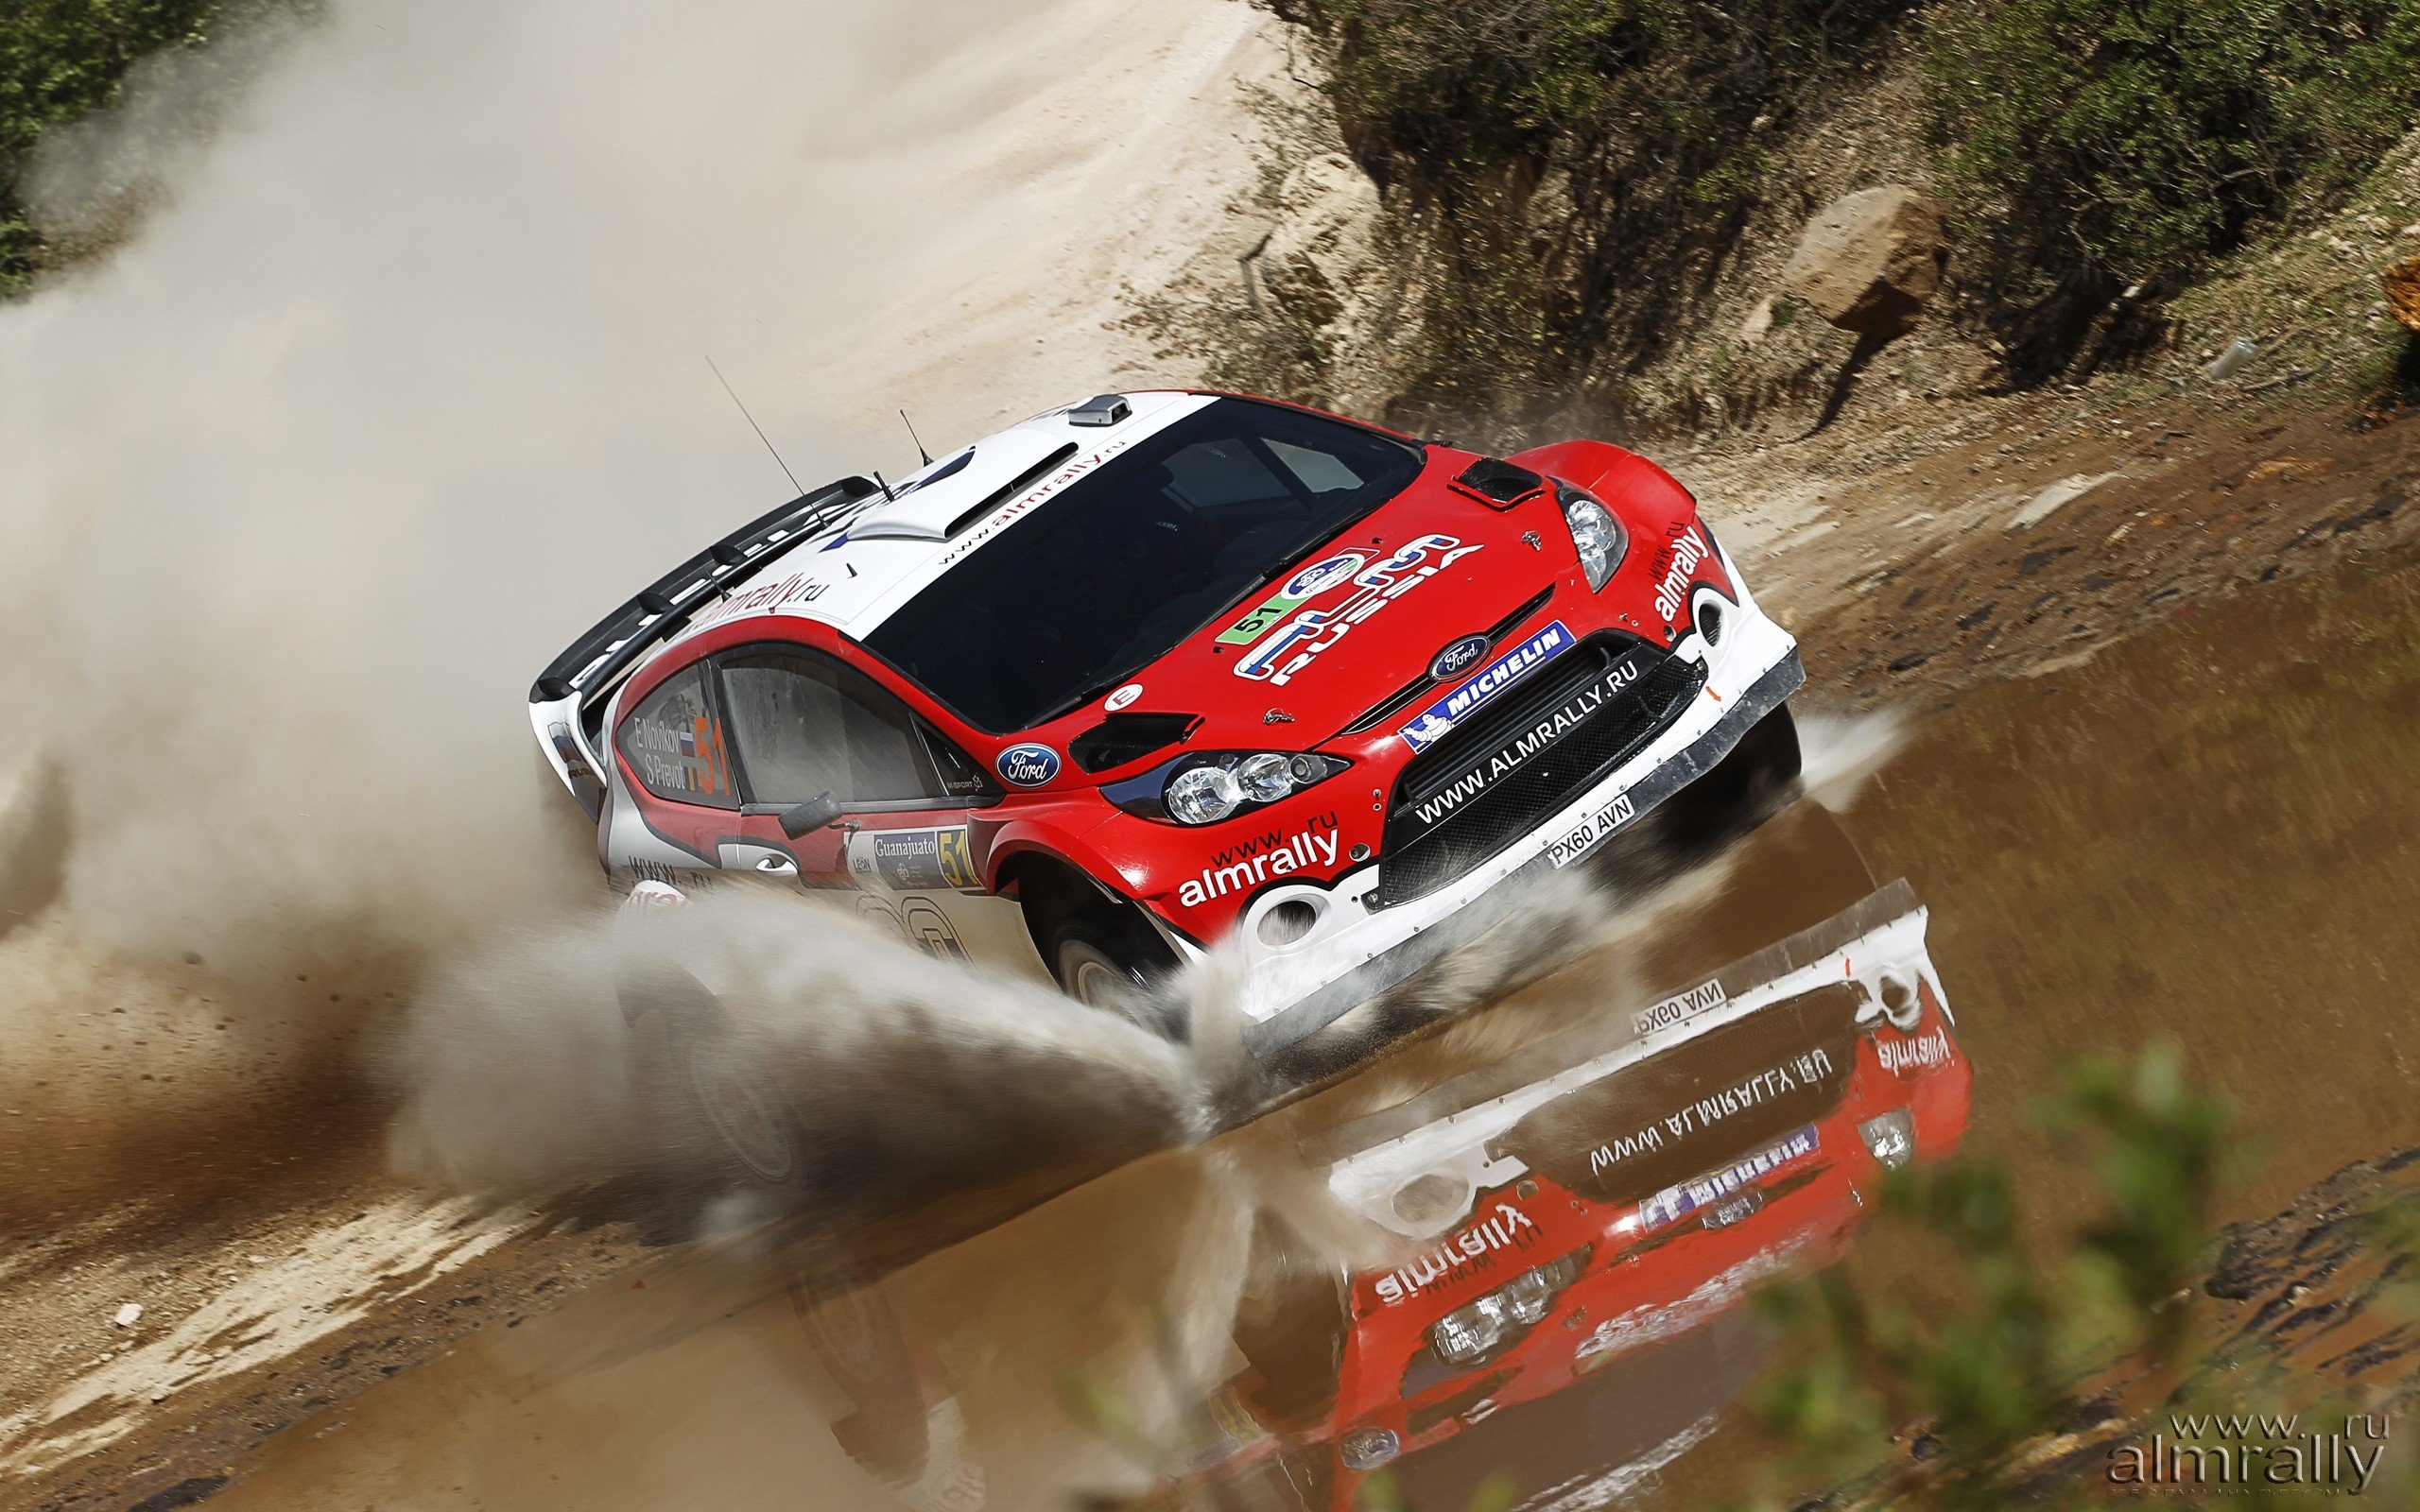 water, Cars, Rally, Ford, Fiesta, Racing, Red, Cars, Wrc, Races, Rally, Cars, Racing, Cars, Ford, Fiesta, Wrc Wallpaper